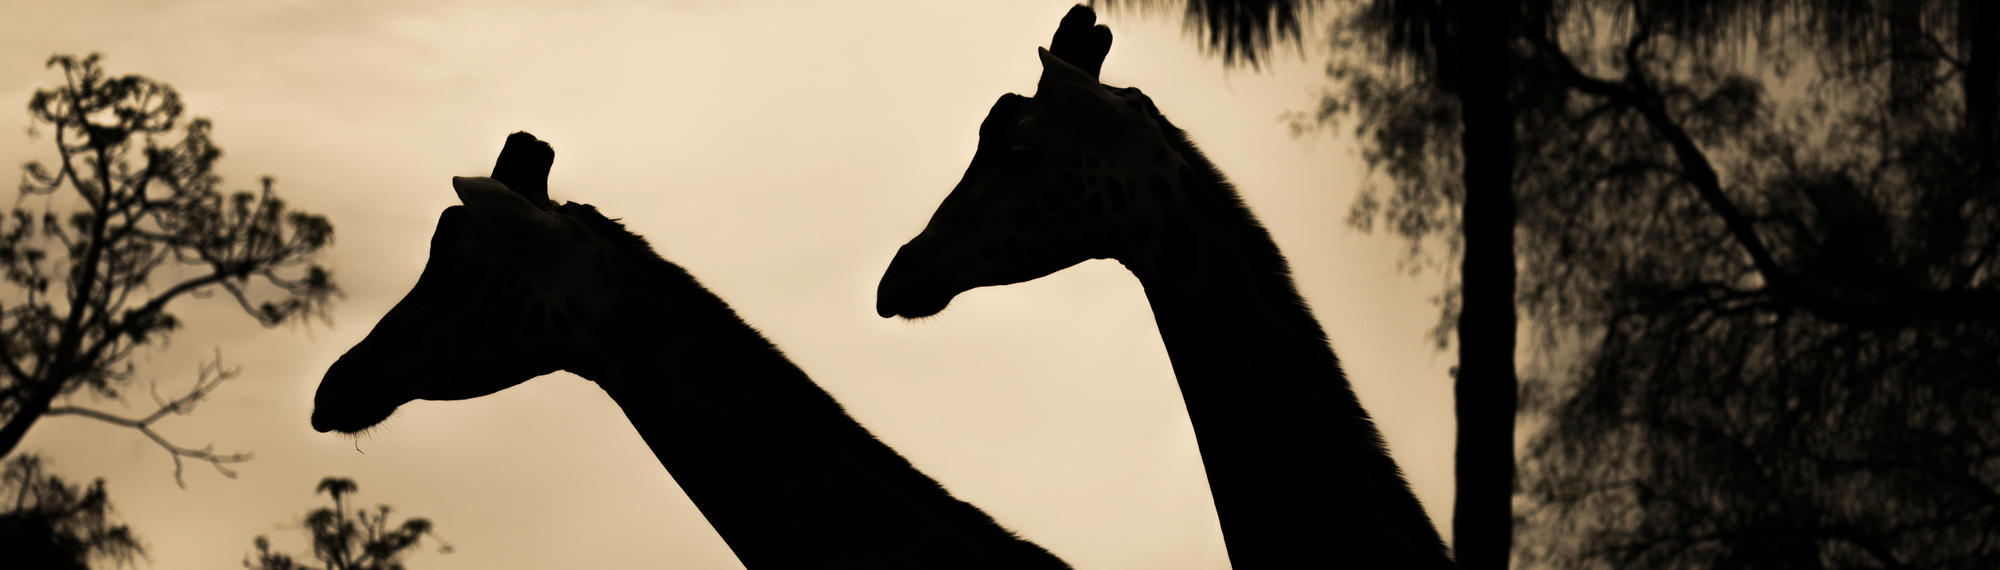 Two Giraffe are walking while the sun is setting. You can only see the silhouette of their necks and head. There are trees in the distance. 